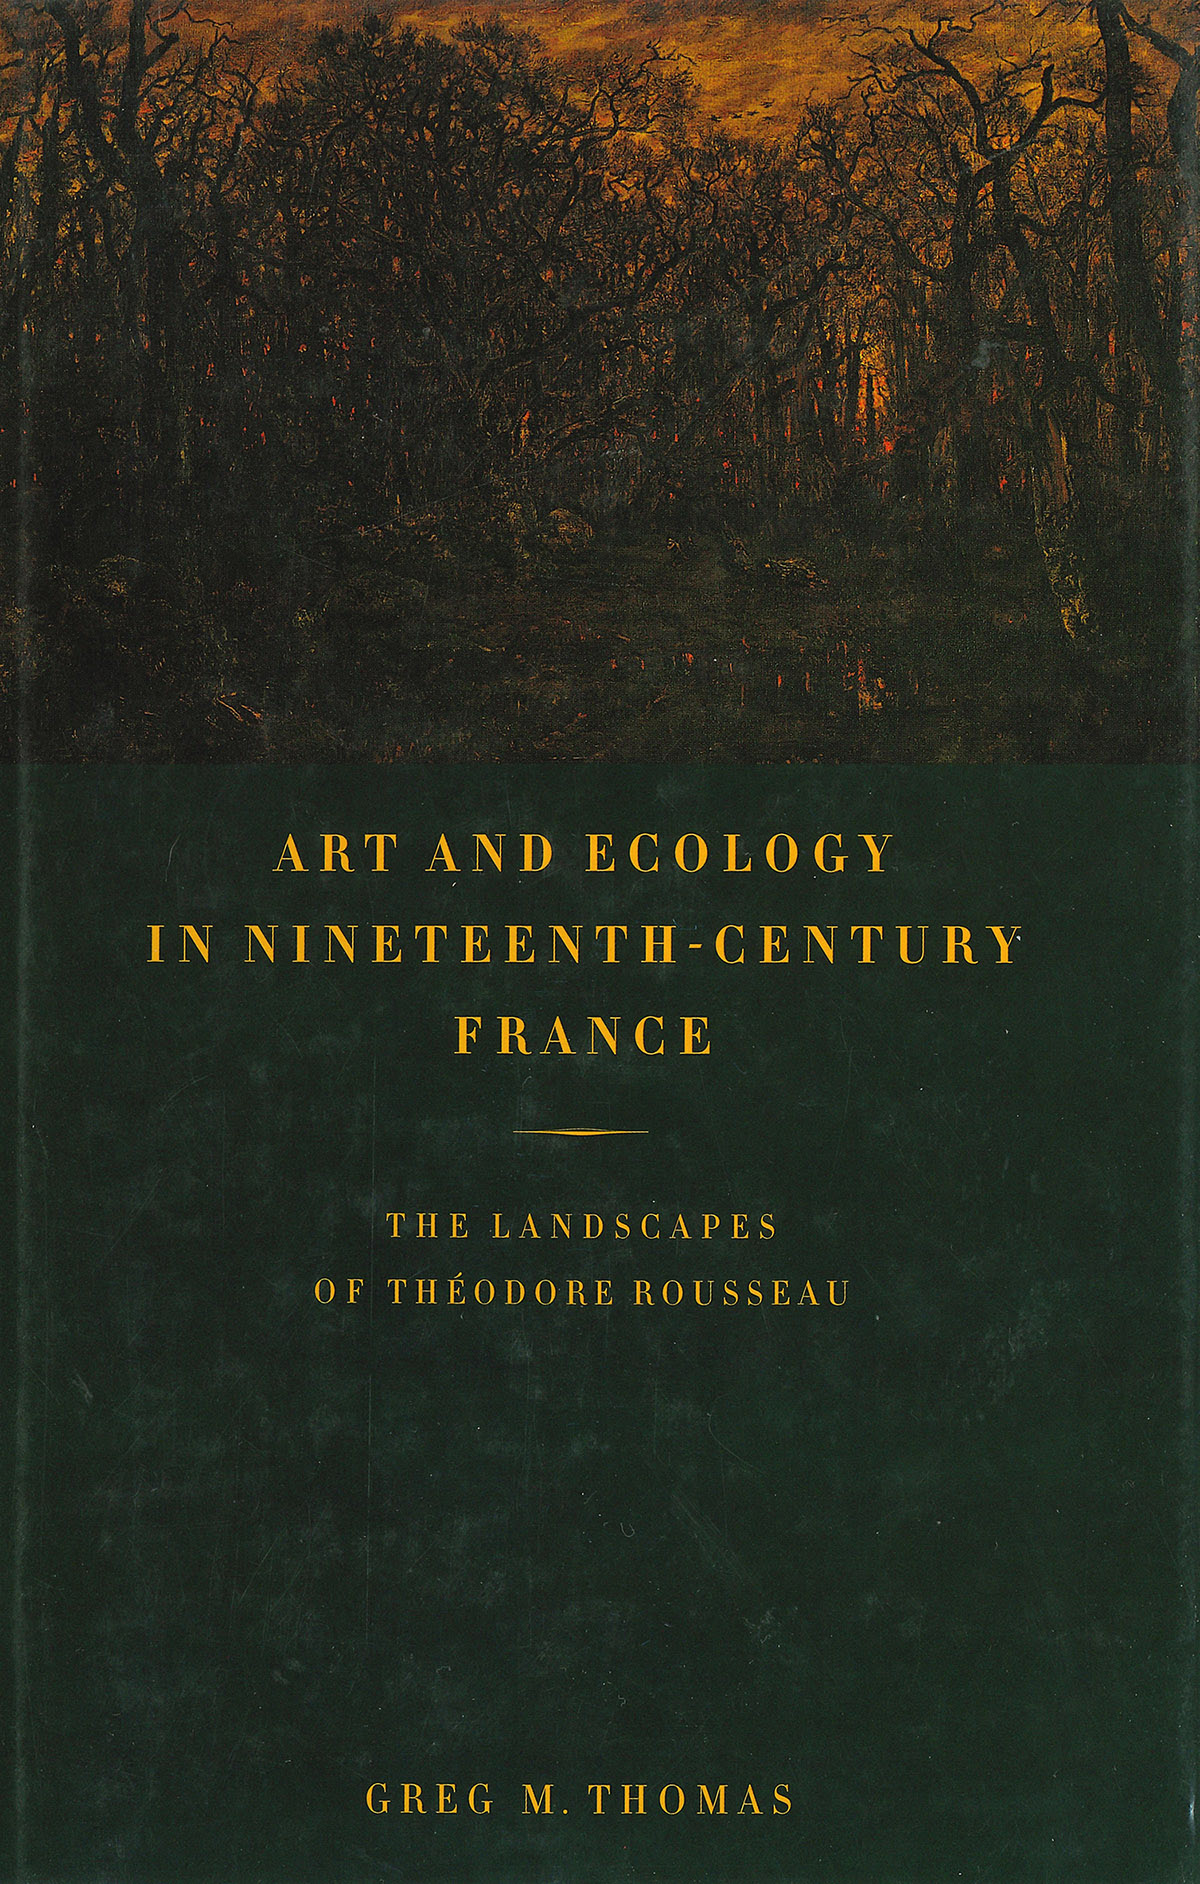 "ART AND ECOLOGY" book cover